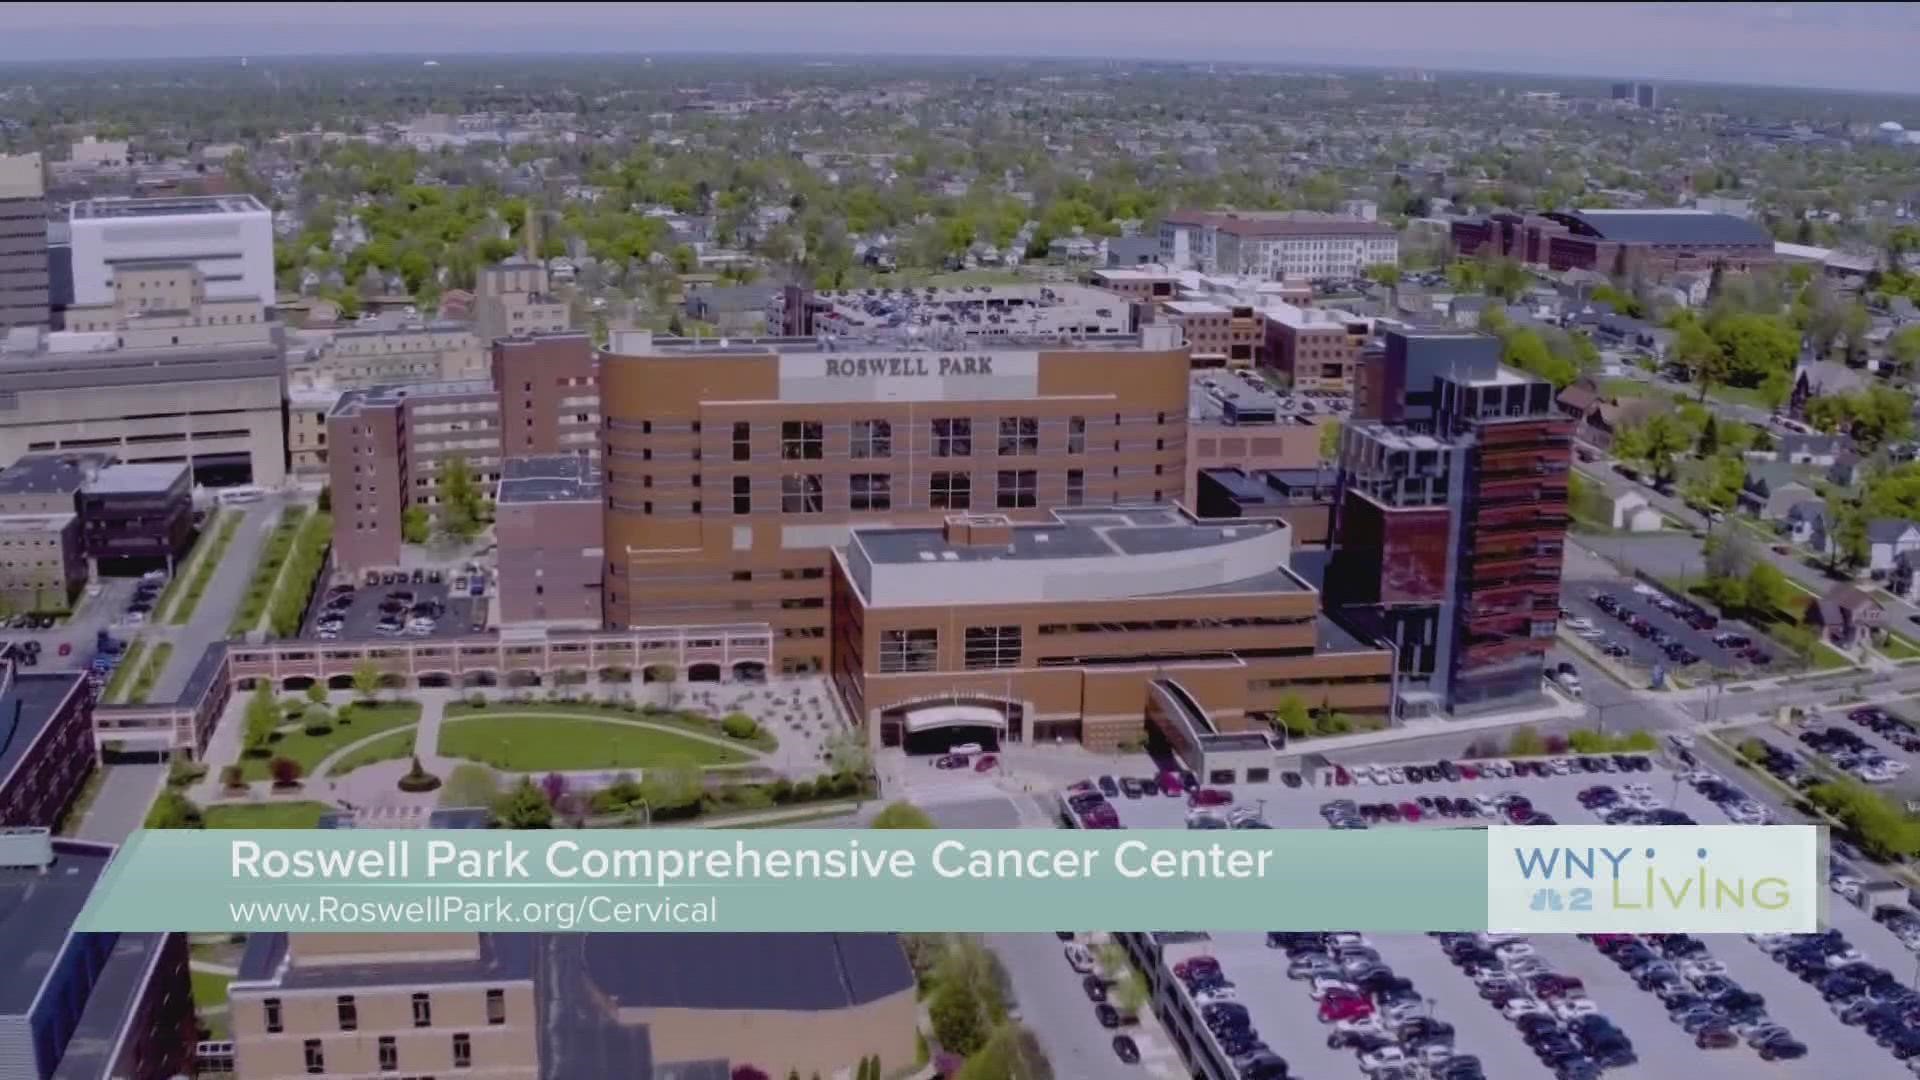 WNY Living - January 7 - Roswell Park Comprehensive Cancer Center (THIS VIDEO IS SPONSORED BY ROSWELL PARK COMPREHENSIVE CANCER CENTER)